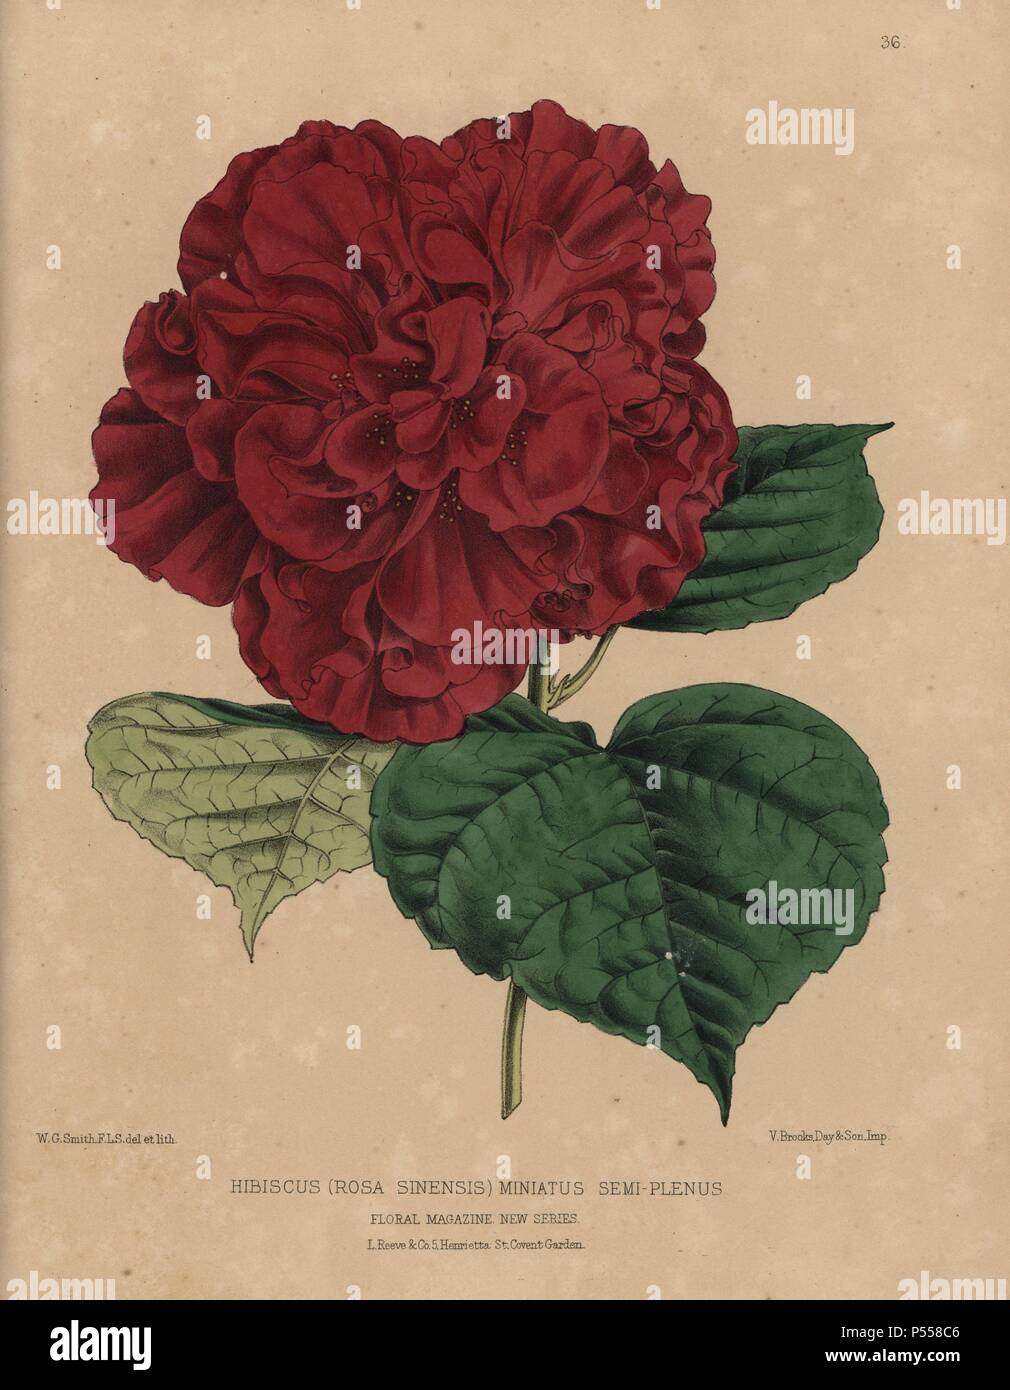 Crimson hibiscus variety. Hibiscus rosa sinensis miniatus semi-plenus. Handcolored botanical drawn and lithographed by W.G. Smith from H.H. Dombrain's 'Floral Magazine' 1872.. Worthington G. Smith (1835-1917), architect, engraver and mycologist. Smith also illustrated 'The Gardener's Chronicle.' Henry Honywood Dombrain (1818-1905), clergyman gardener, was editor of the 'Floral Magazine' from 1862 to 1873. Stock Photo